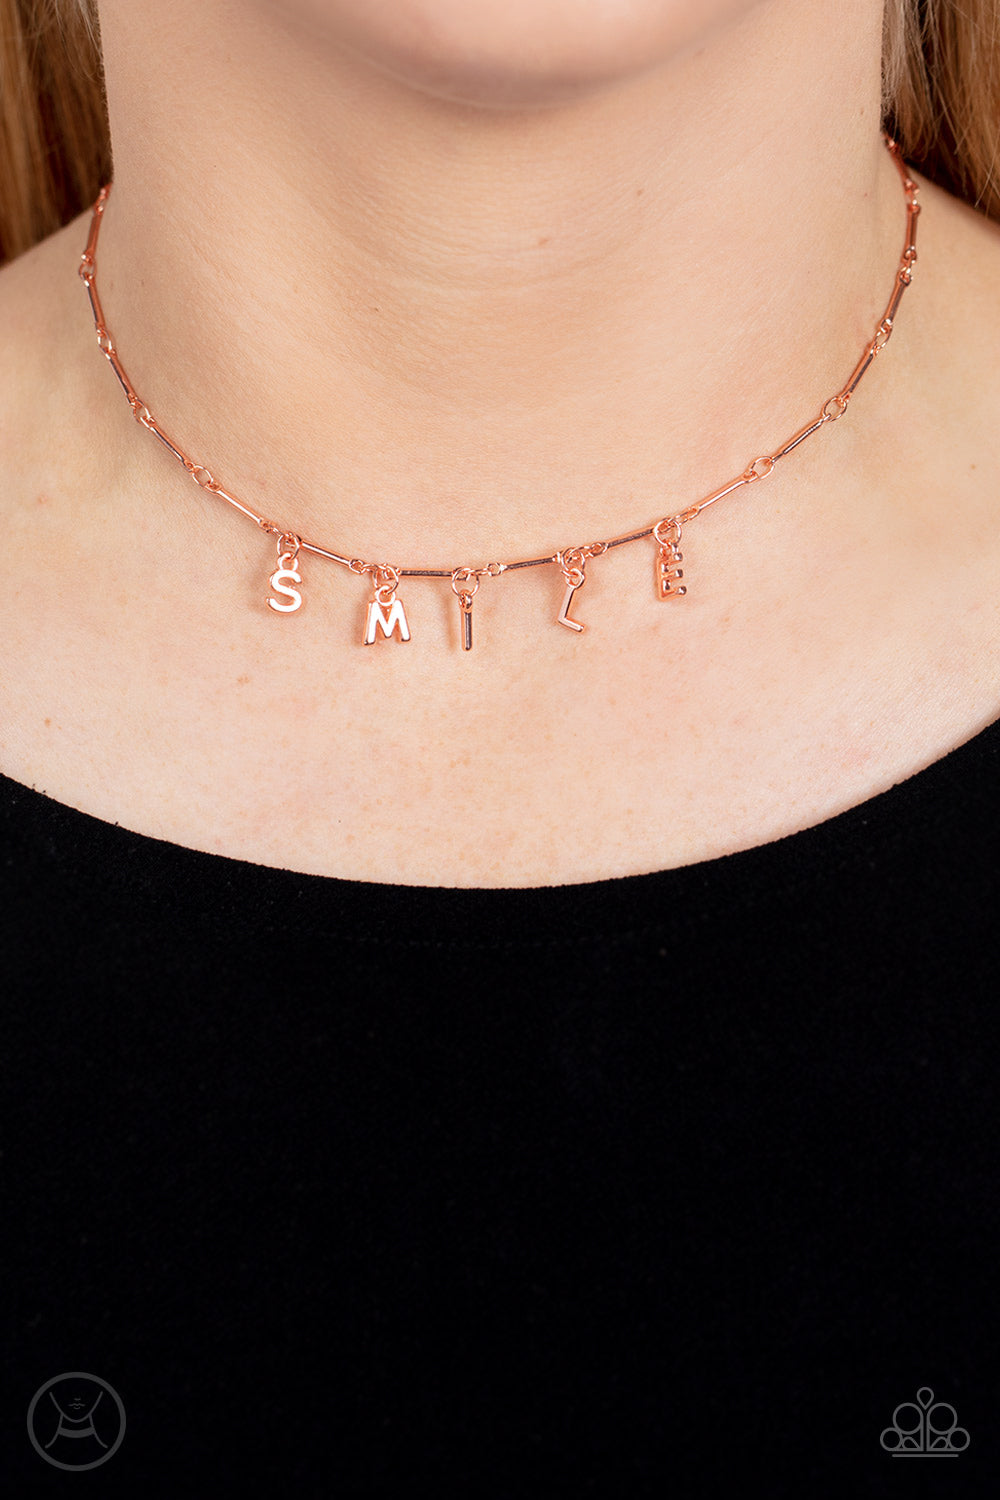 Say My Name Copper Choker Necklace - Paparazzi Accessories  Separated by dainty copper rods, copper letters spell out the word SMILE in a soft, and simple manner. Features an adjustable clasp closure.  Sold as one individual choker necklace. Includes one pair of matching earrings.